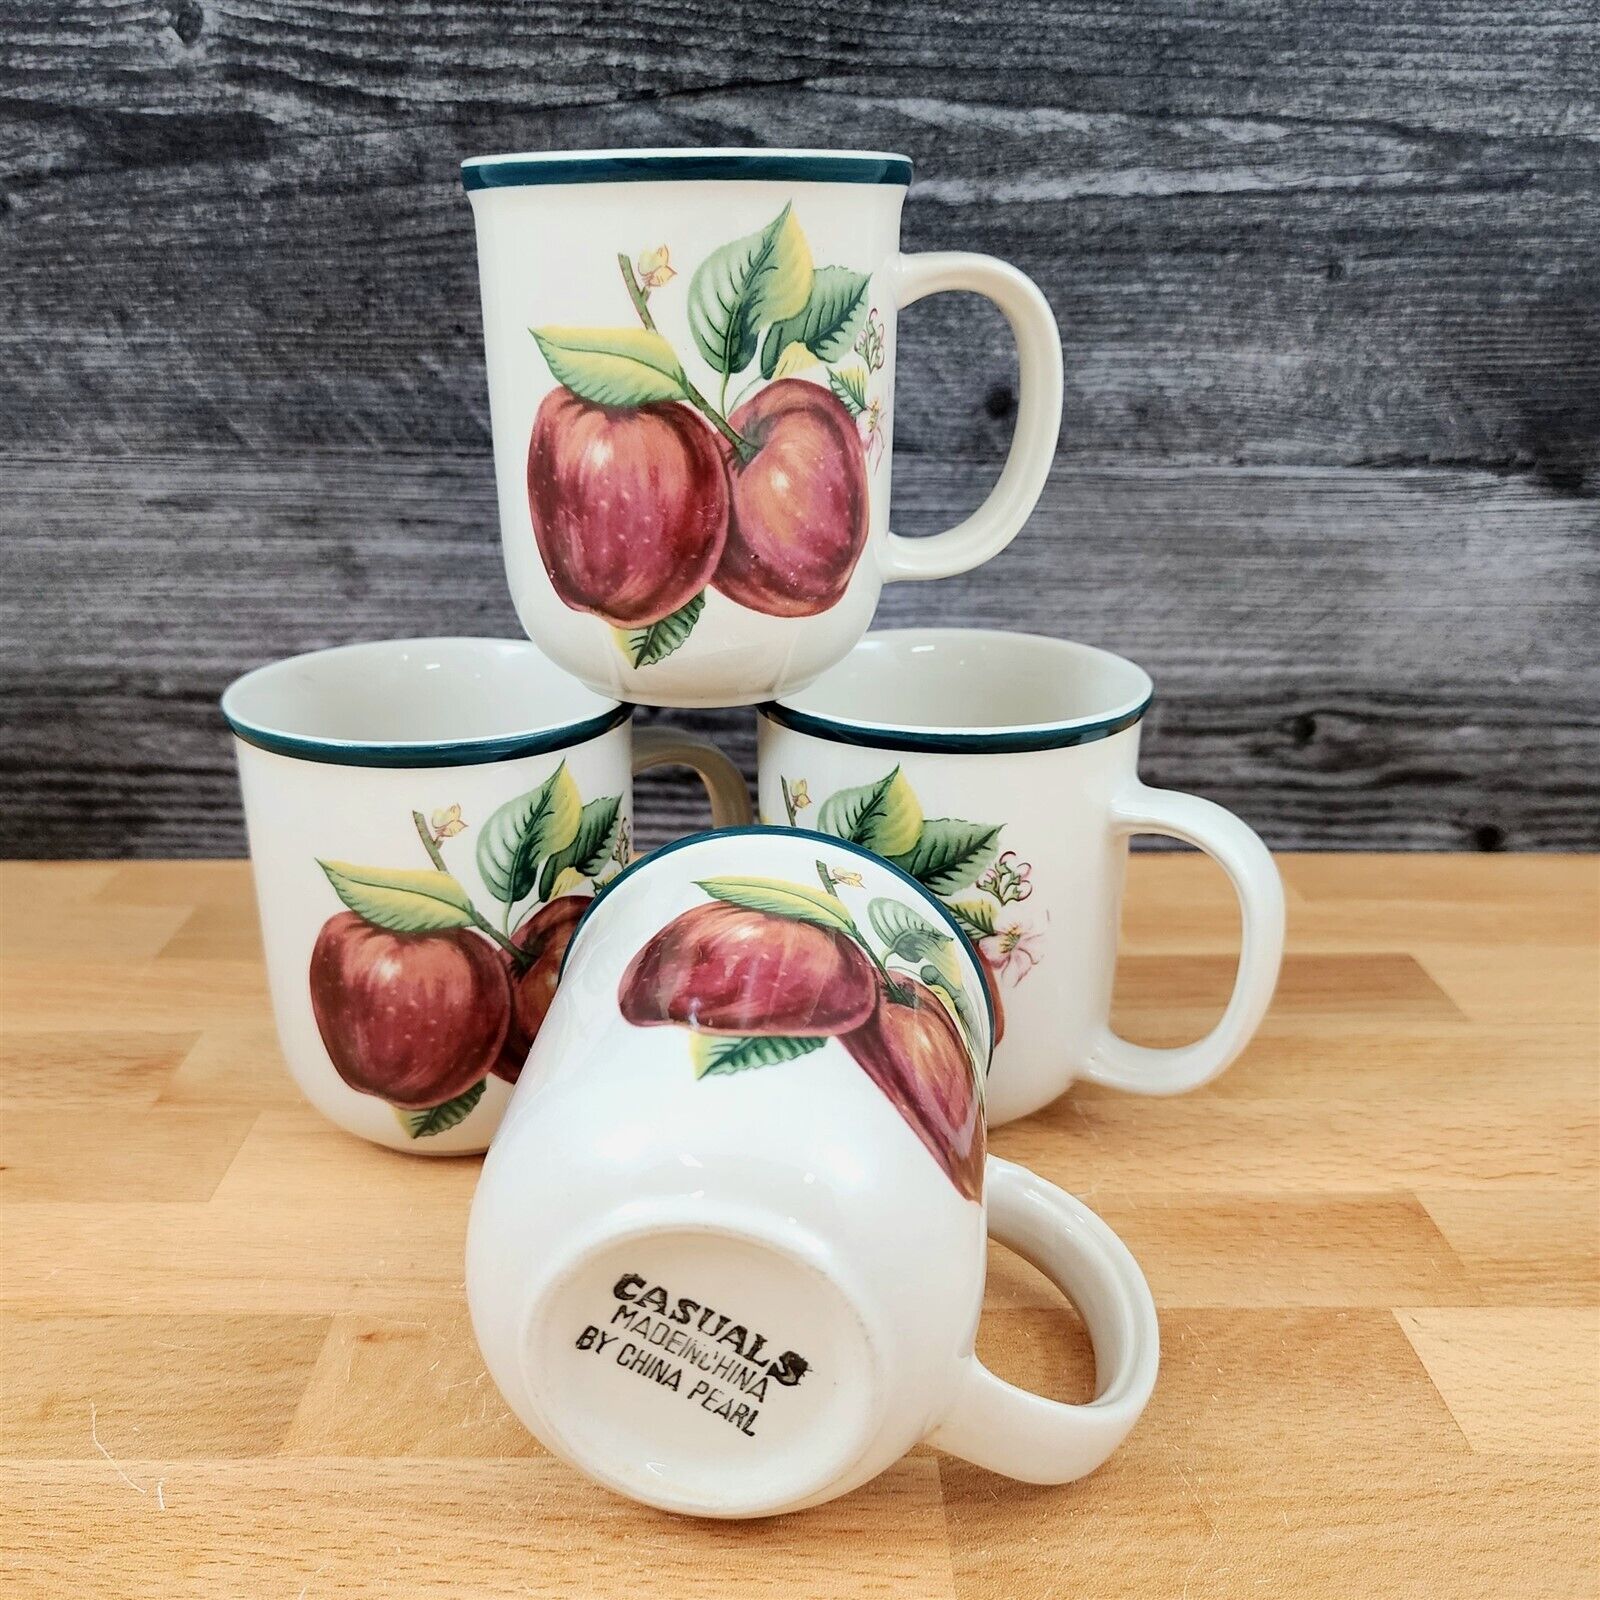 China Pearl Casuals Apples 4 Coffee Mugs Set 3 3/4 Tea Cup